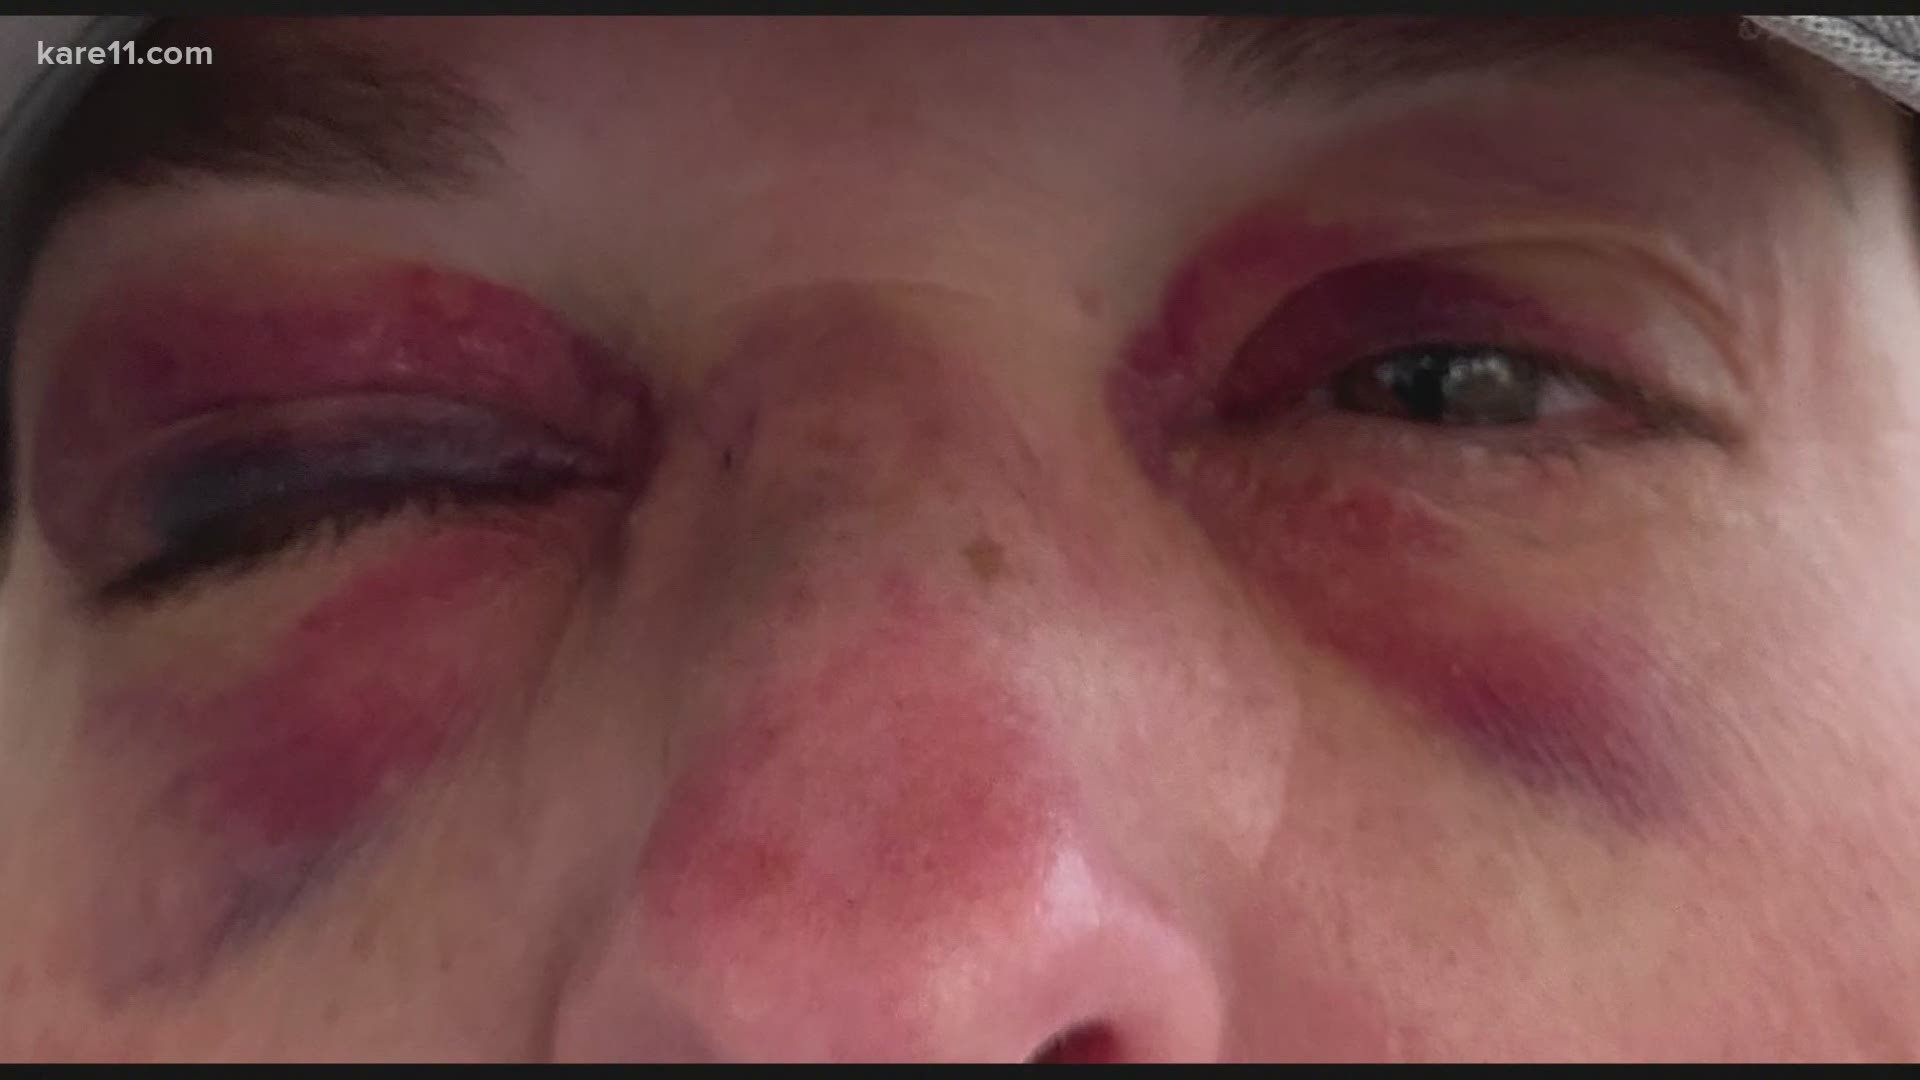 Couple says they were assaulted by a large group of people Friday night